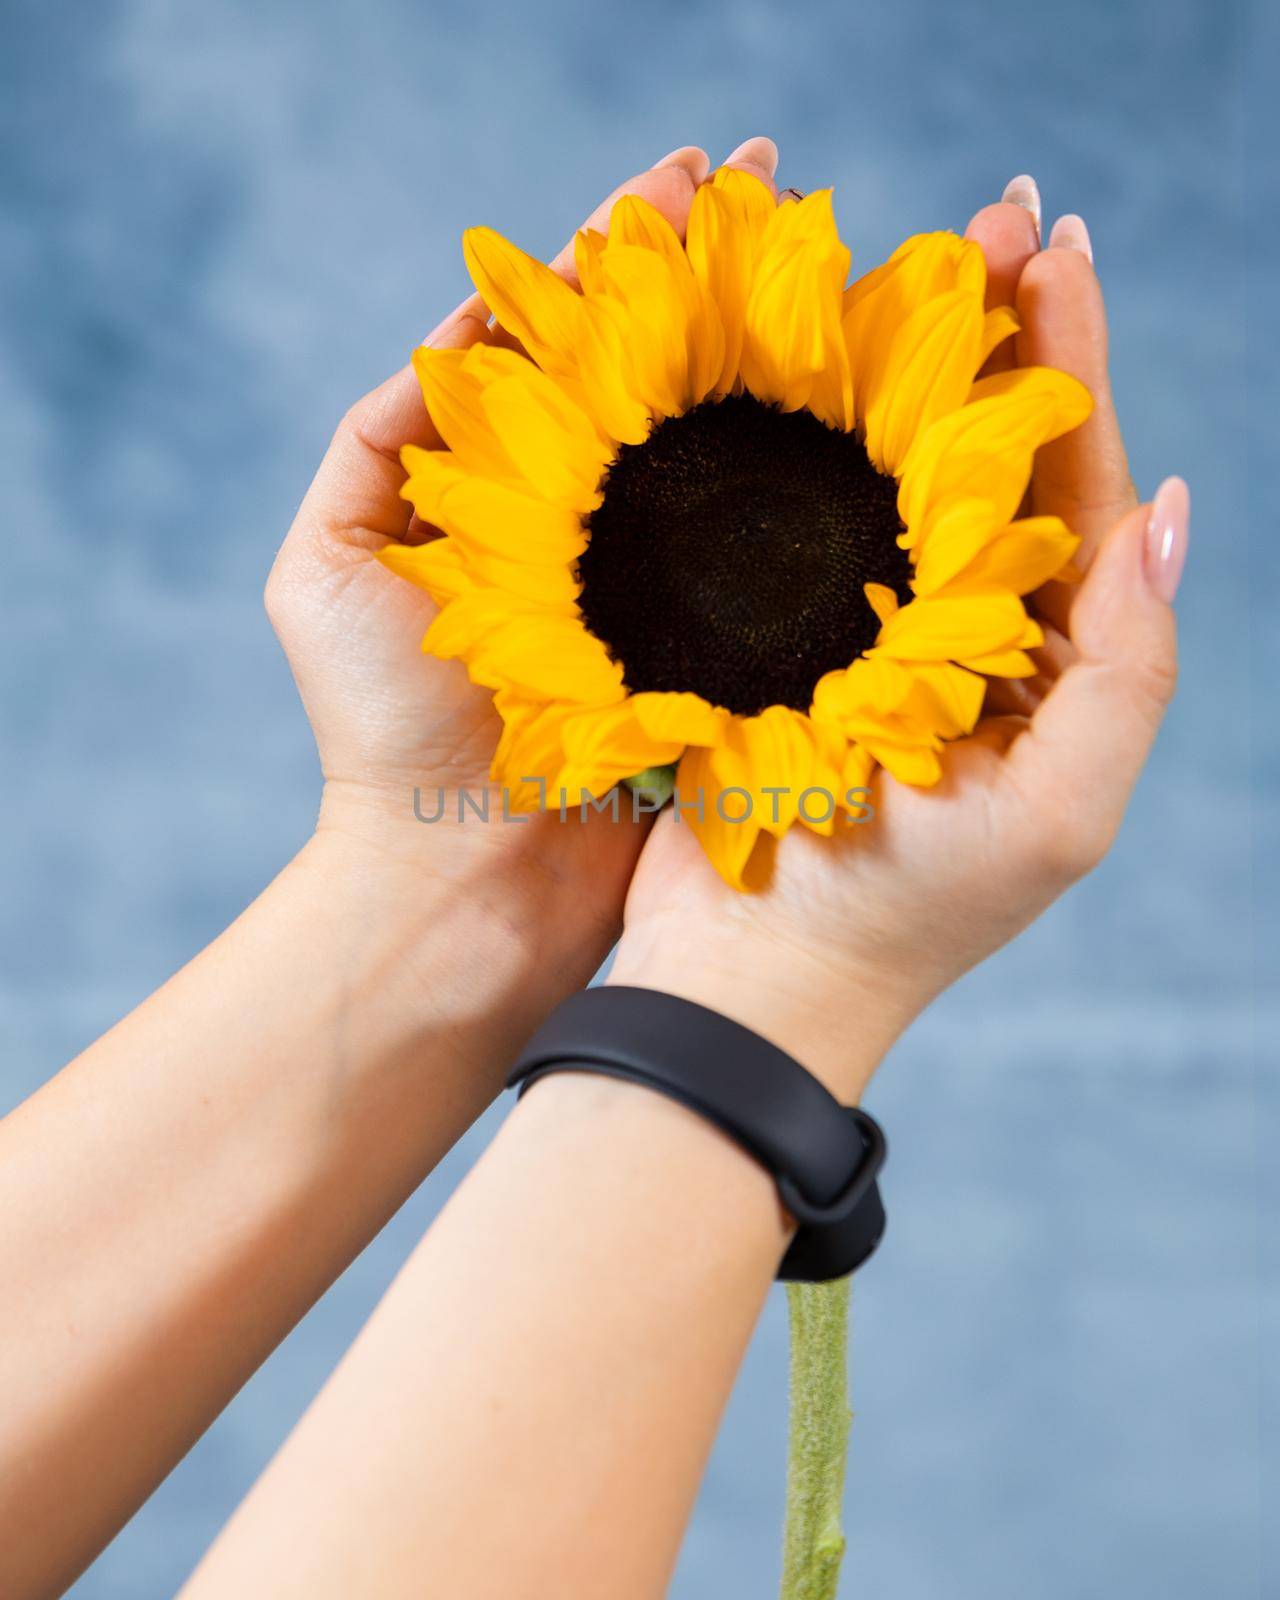 Woman holding single sunflower with blue background by ferhad